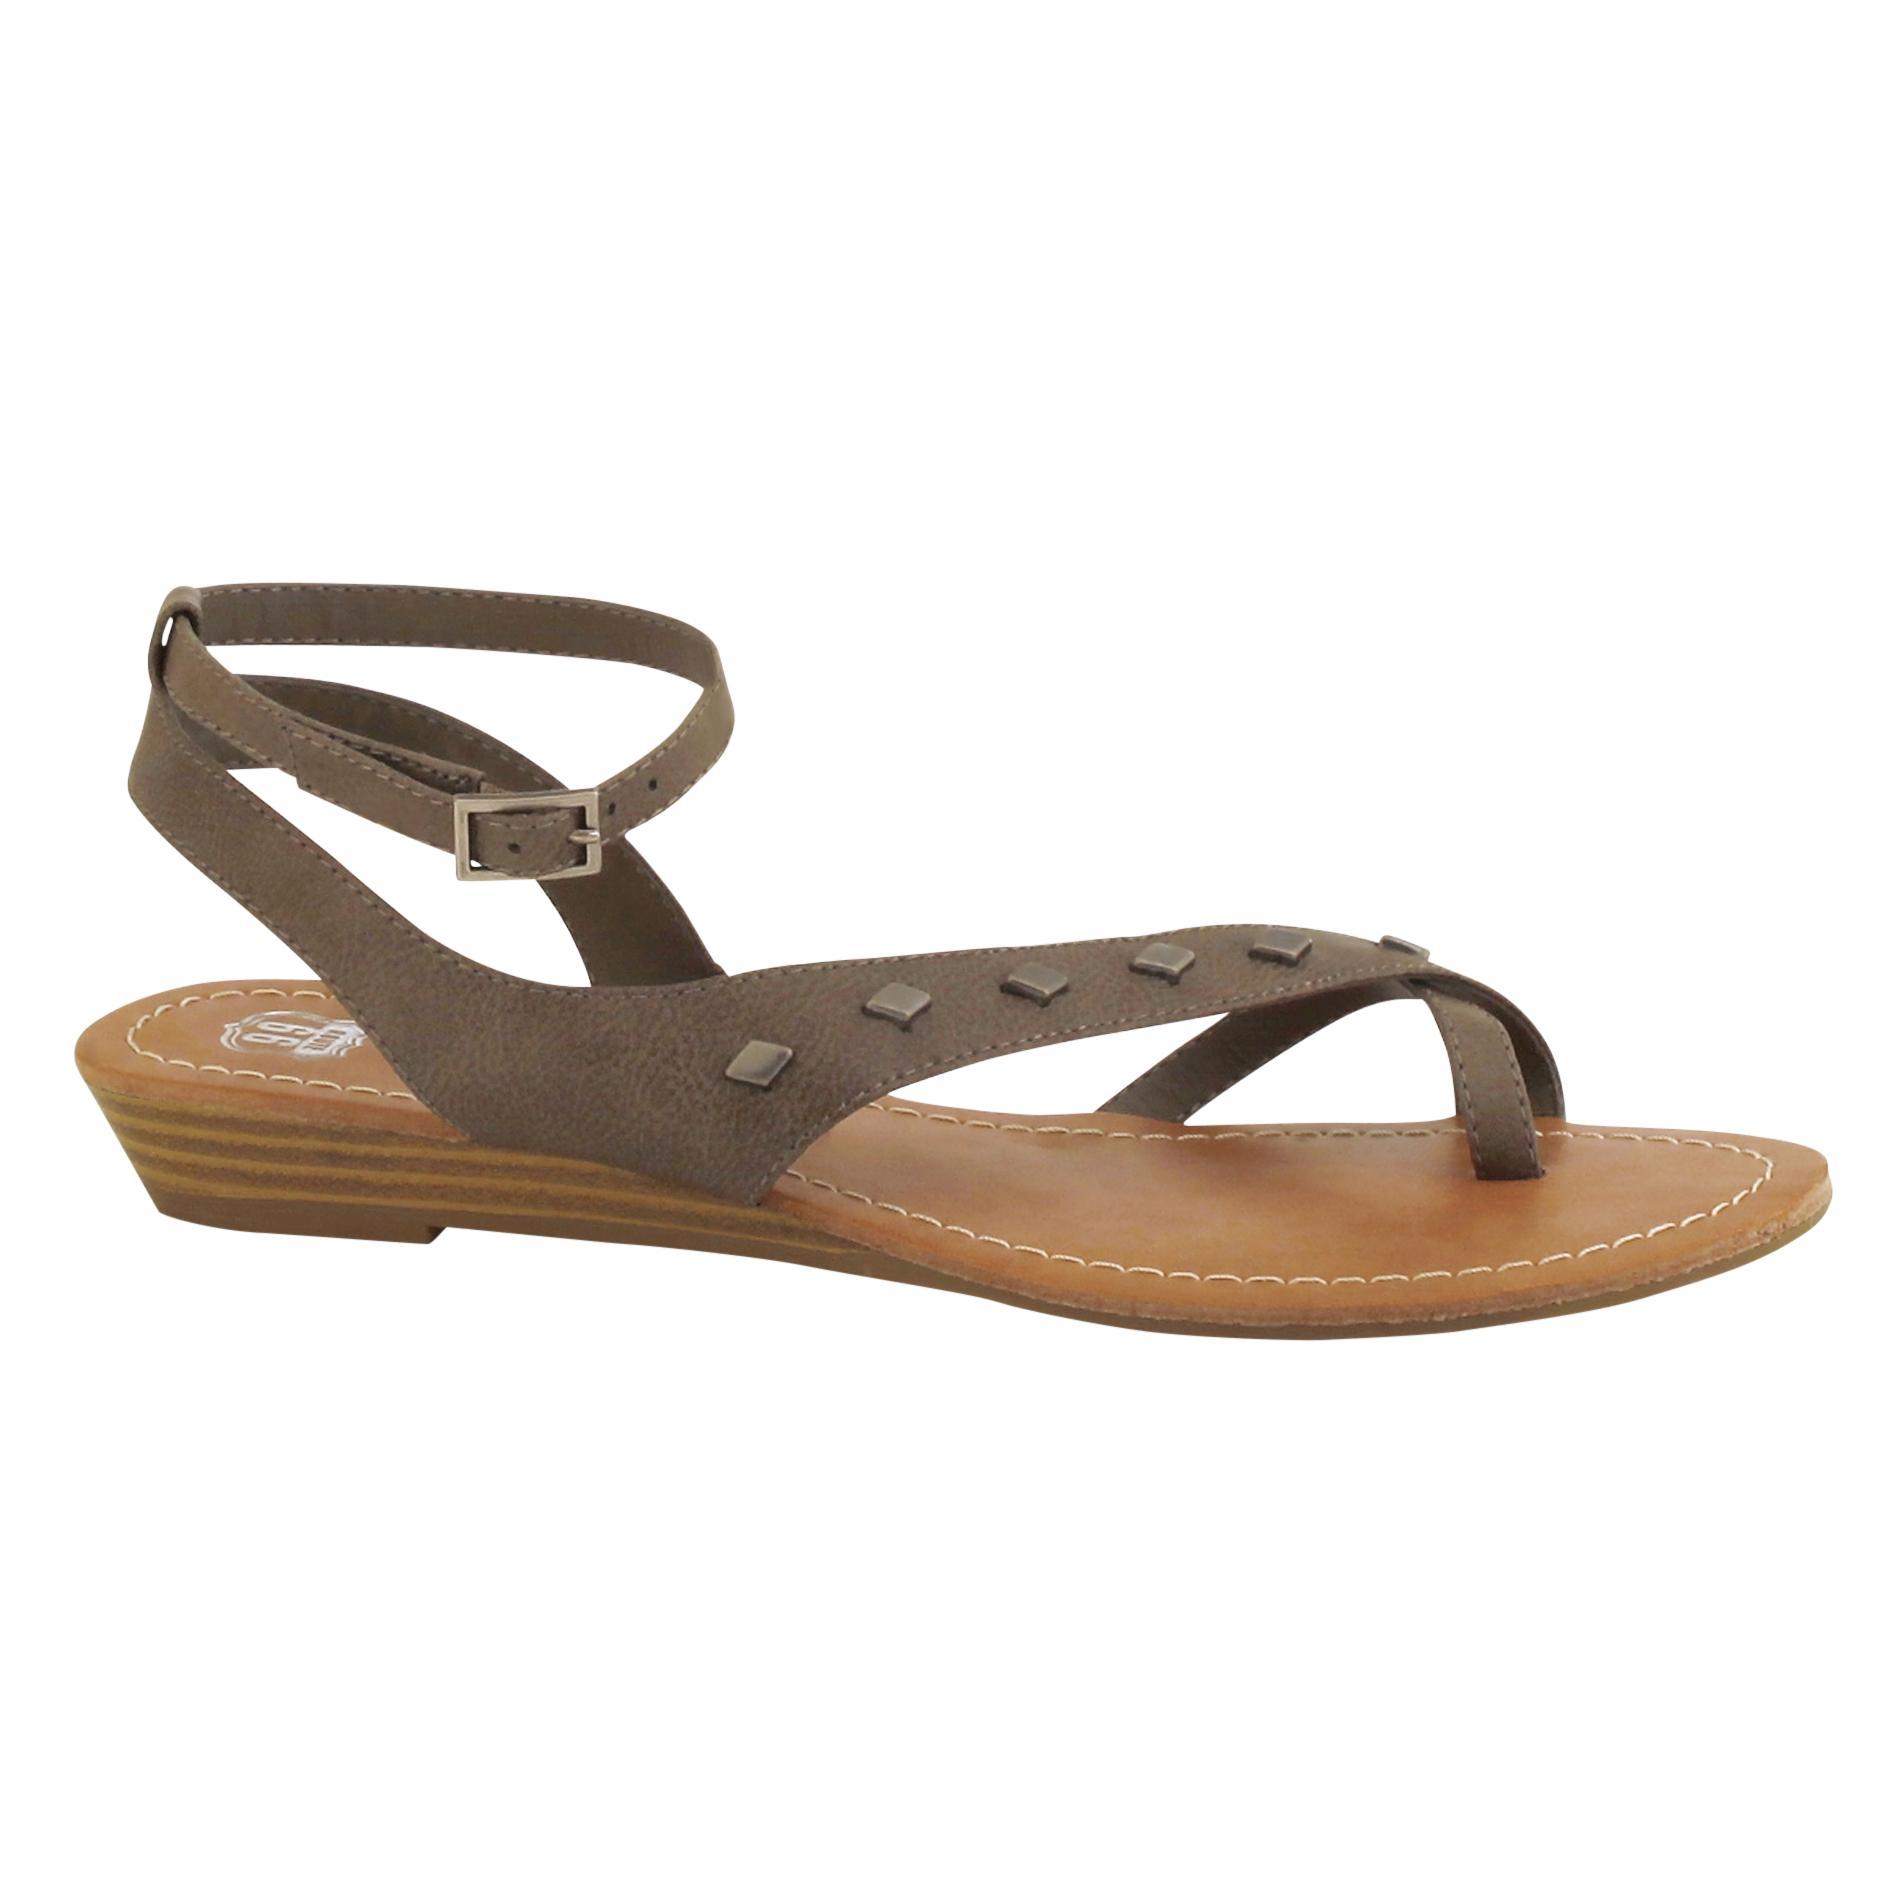 Route 66 Women's Sandal Zody - Taupe